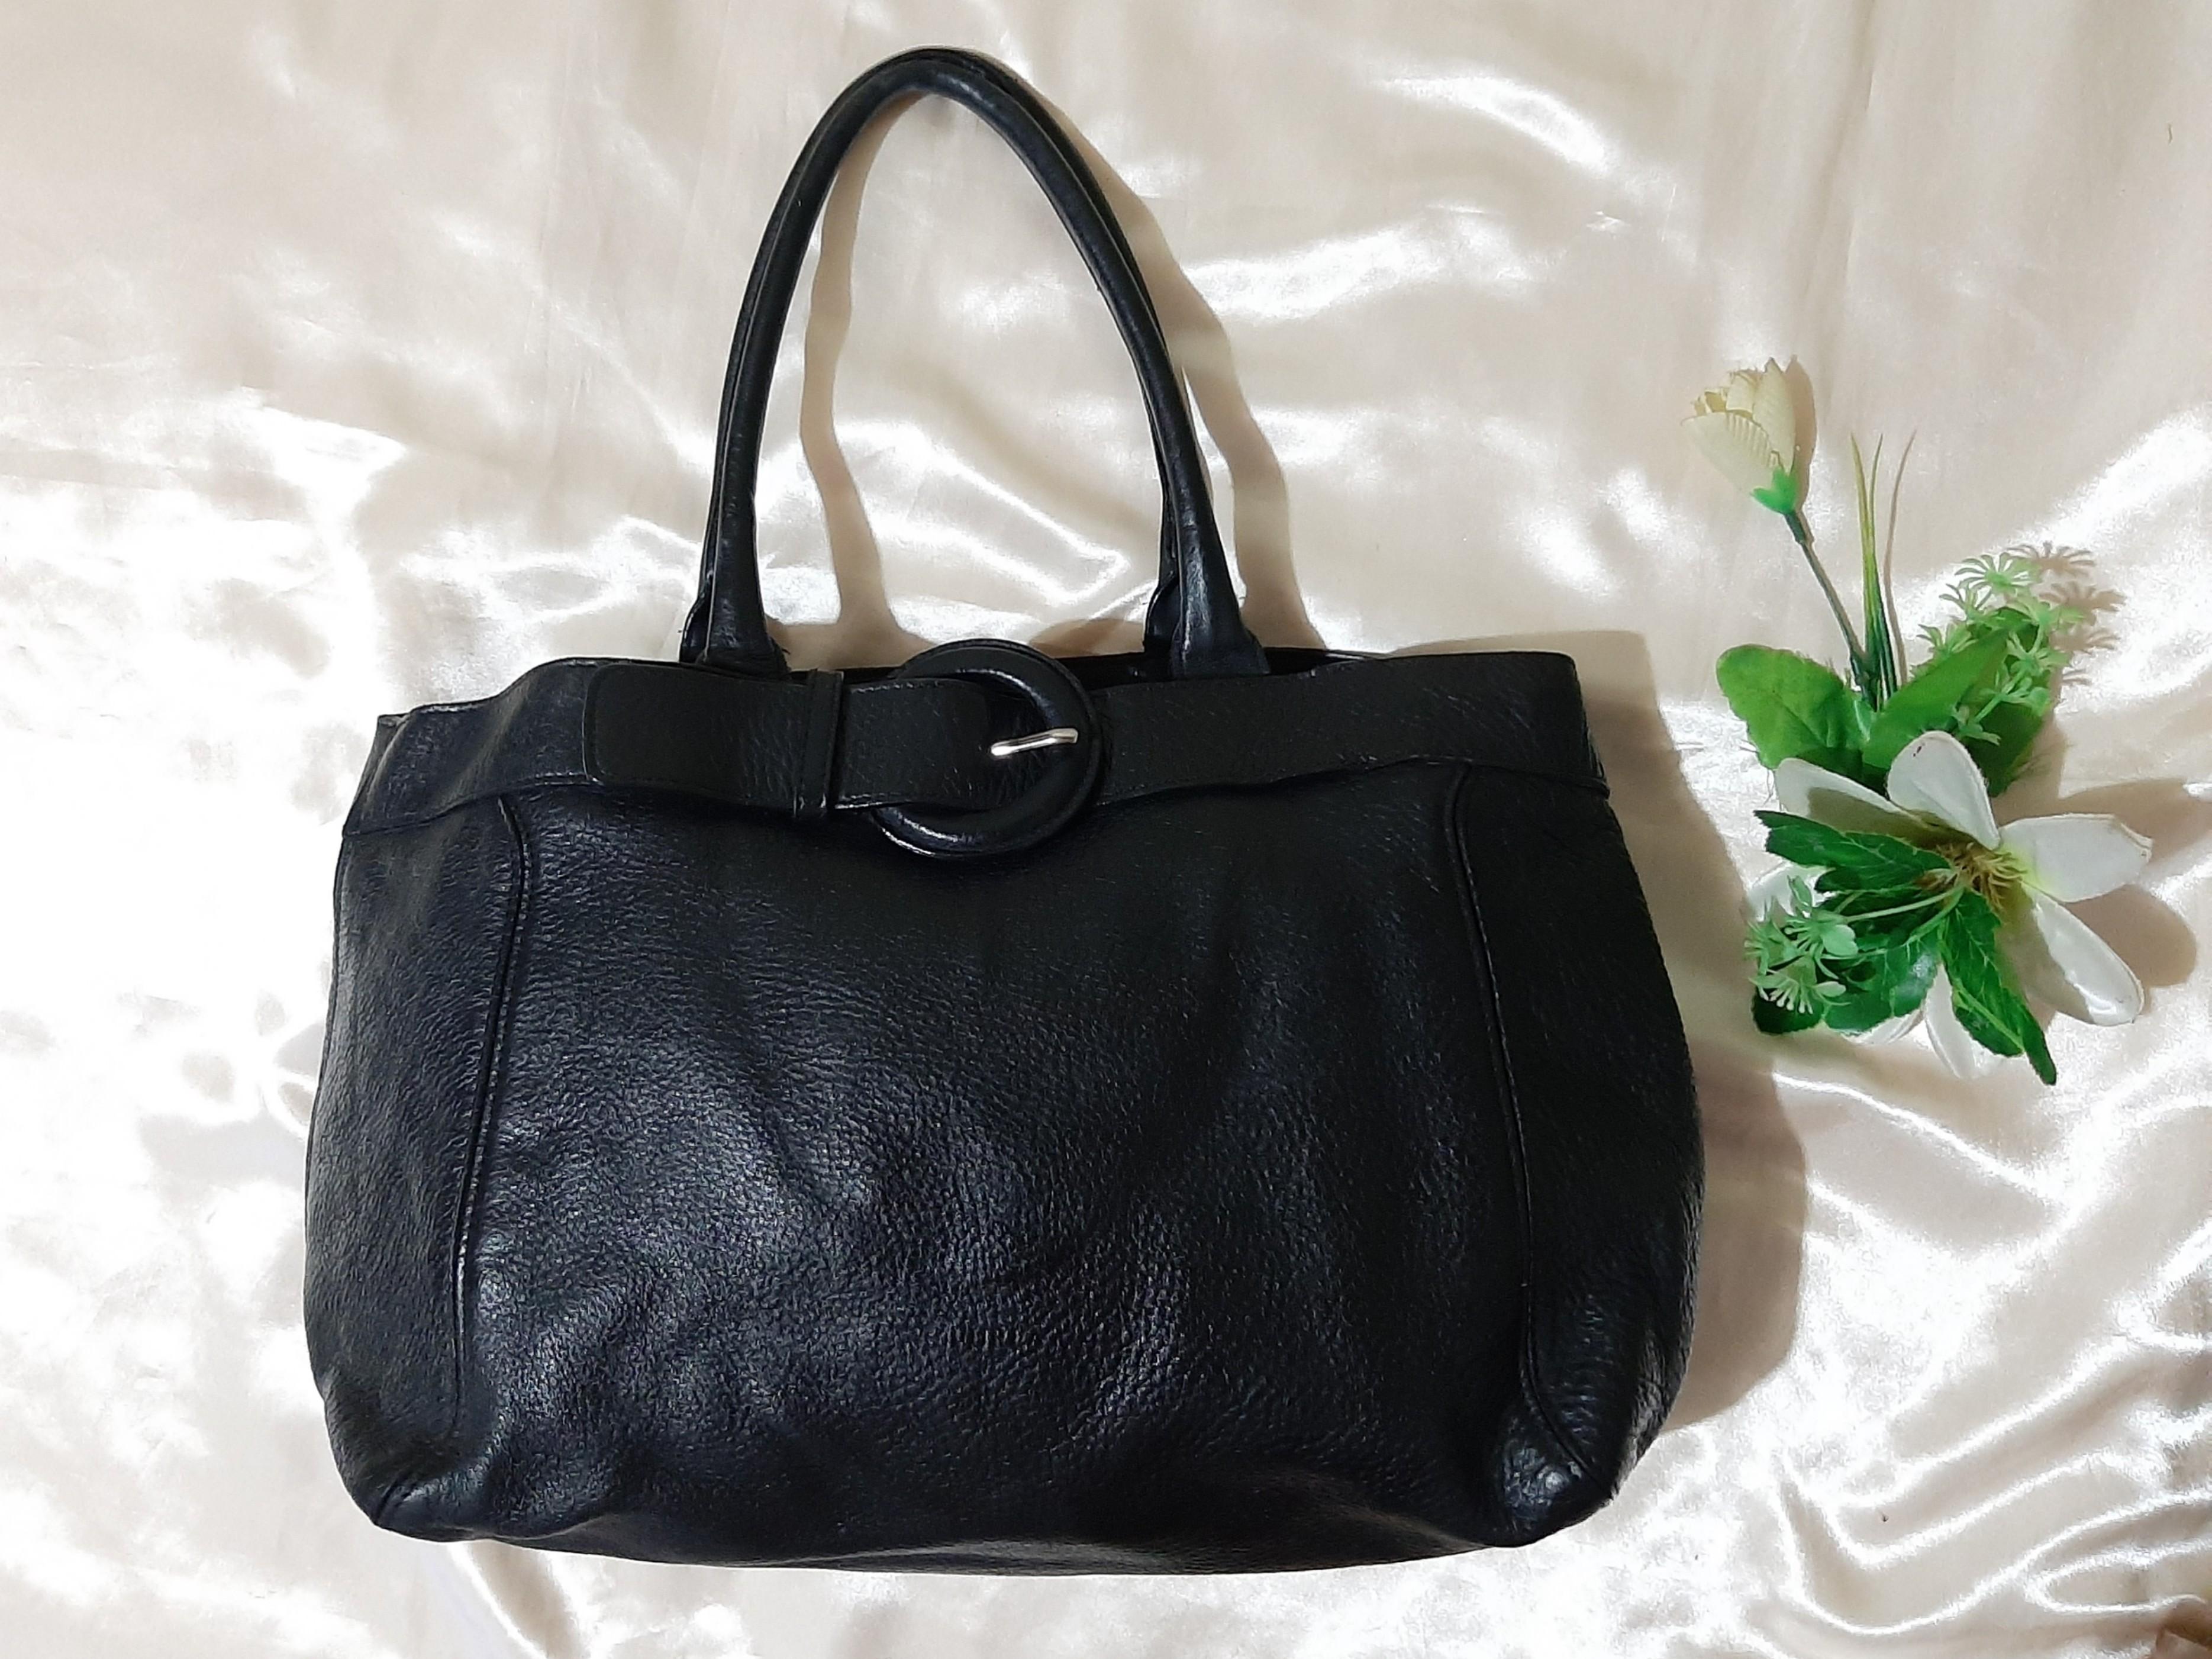 genuine leather tote bags for sale